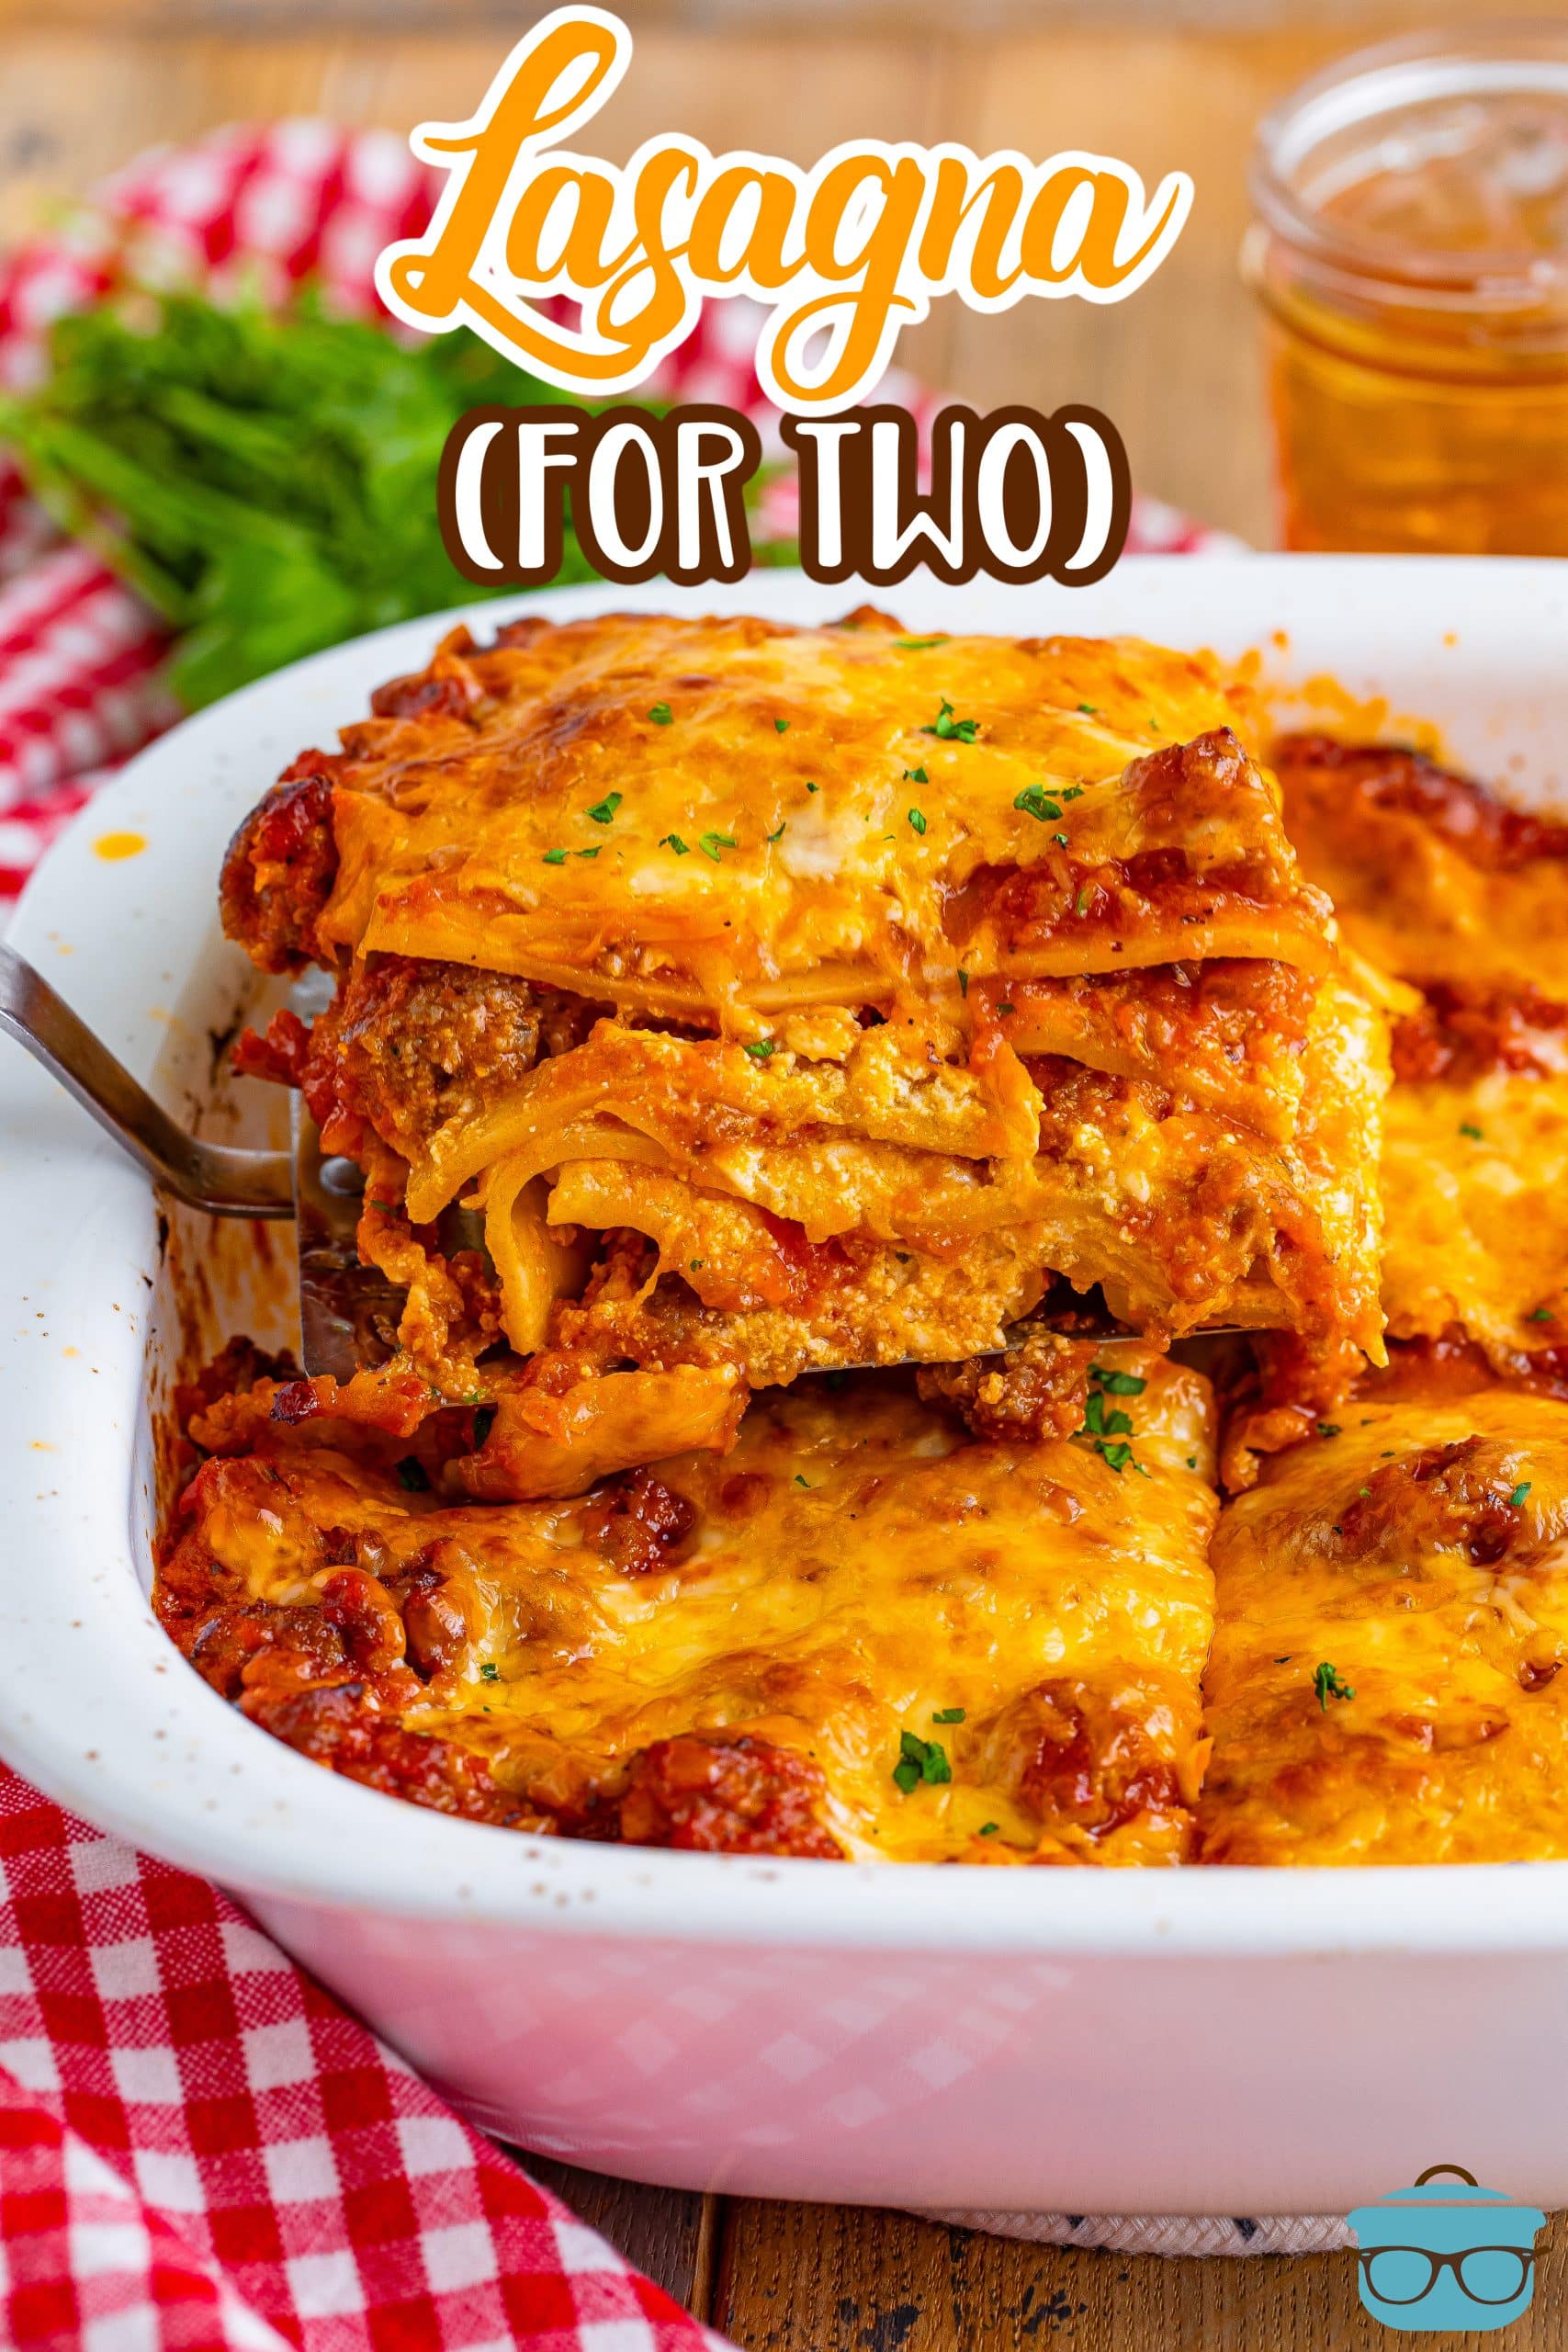 A baking dish with Lasagna for Two.